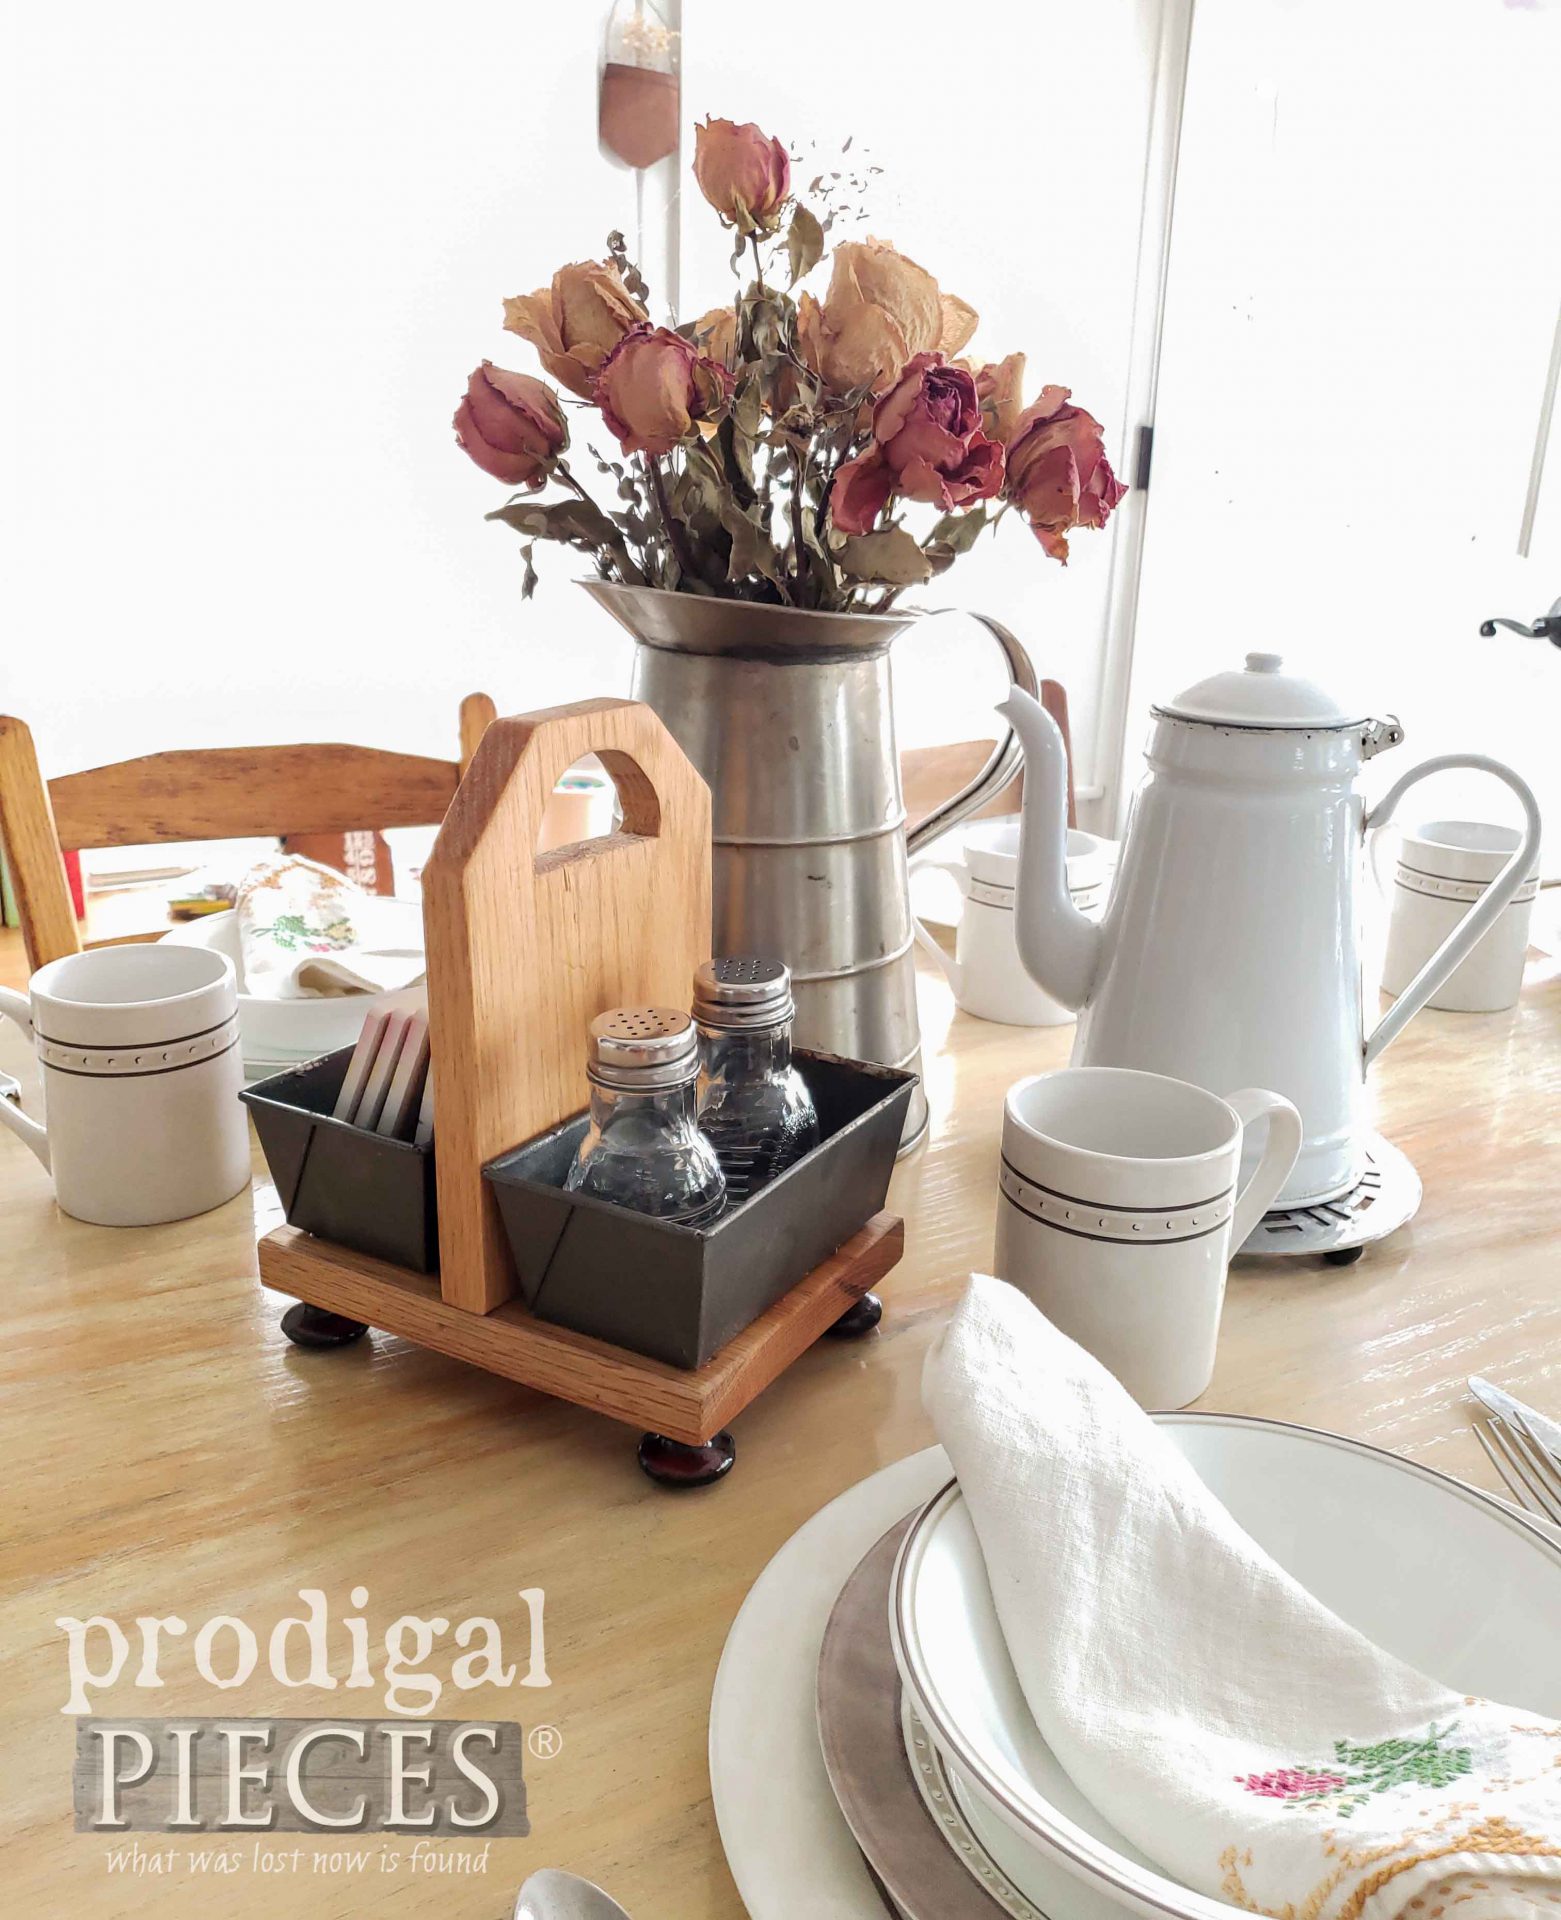 Farmhouse Table Caddy made from Upcycled Bread Pans by Larissa of Prodigal Pieces | prodigalpieces.com #prodigalpieces #upcycle #farmhouse #home #homedecor